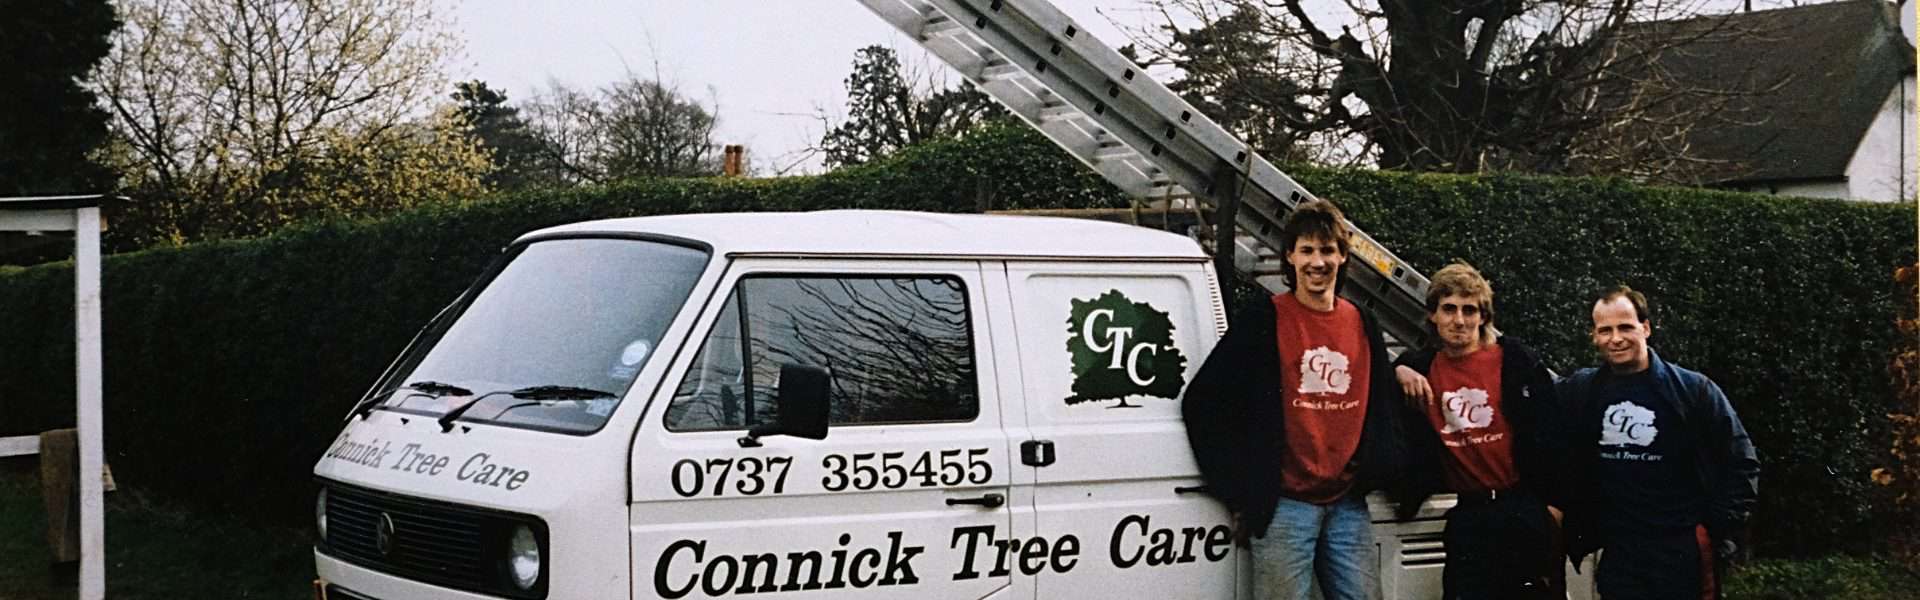 Early photo of Connick Tree Care